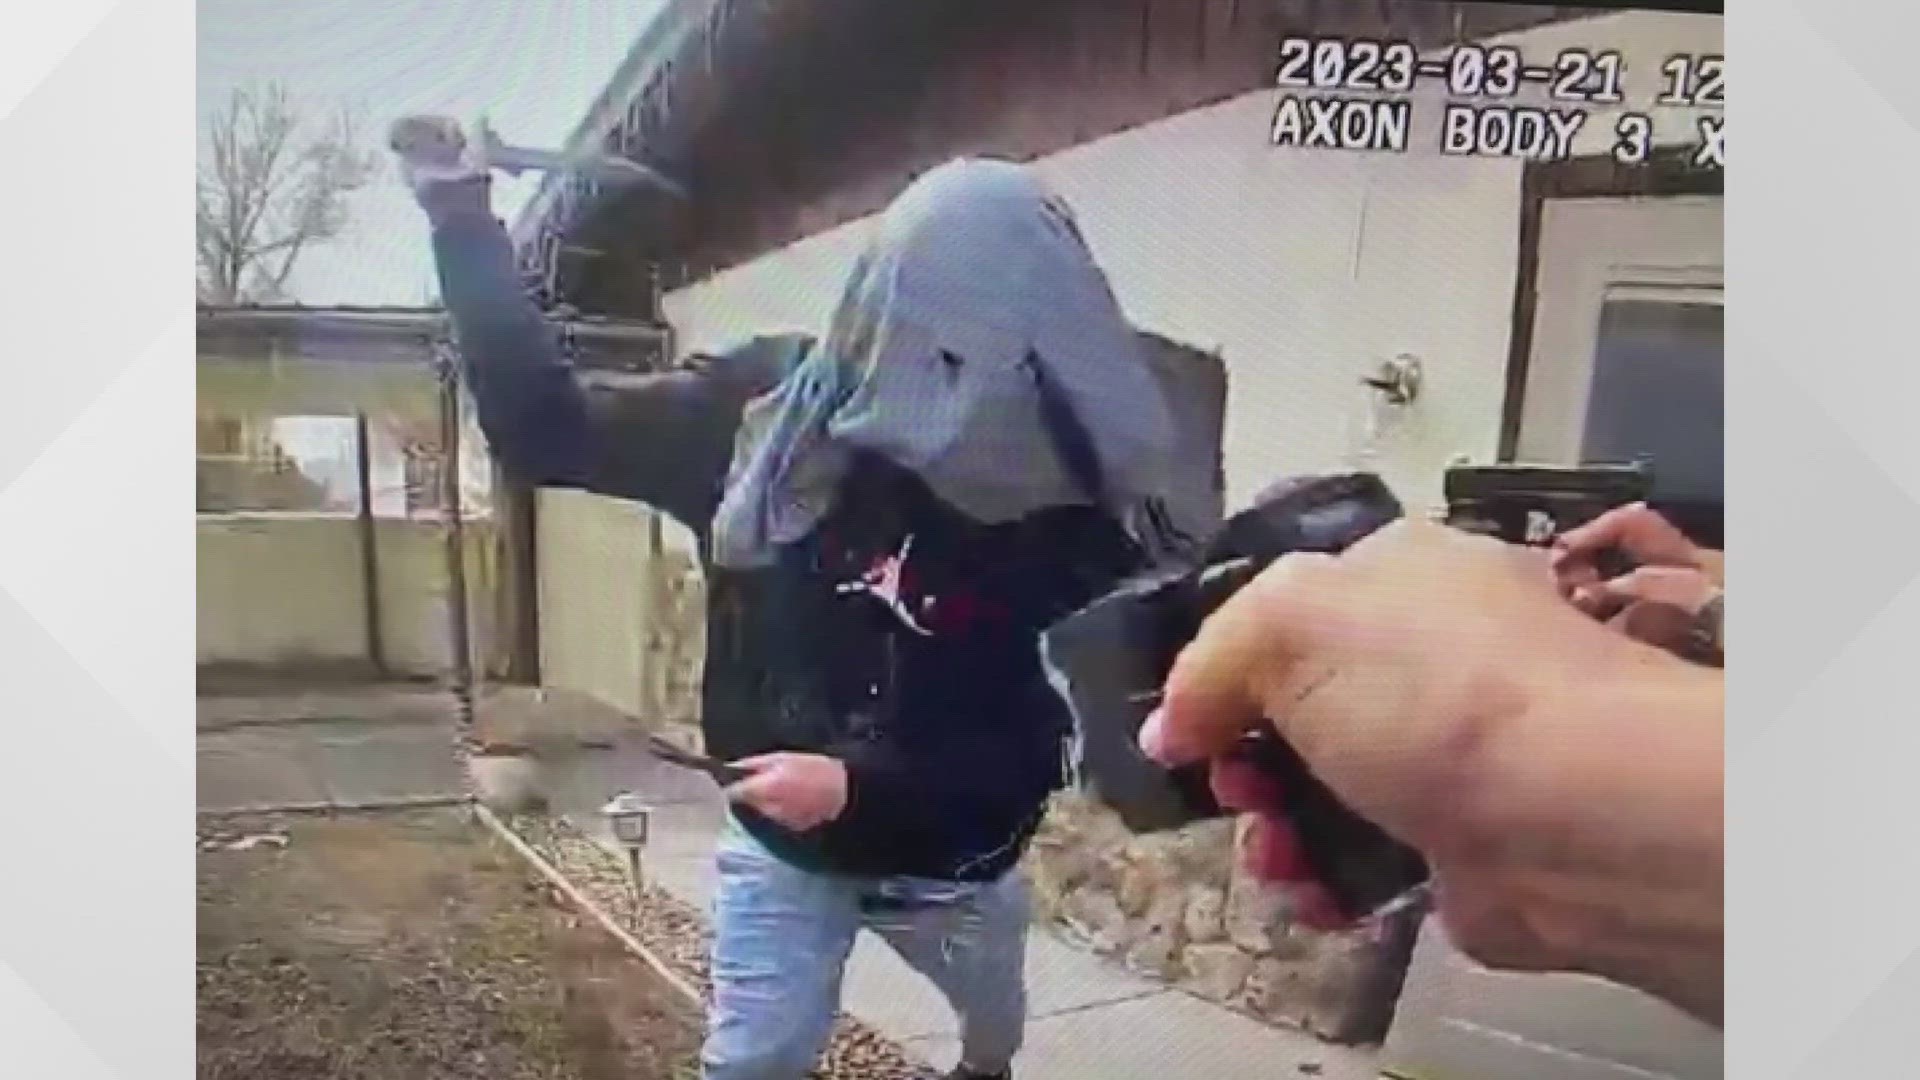 Officers said the 18-year-old ran at them, swinging two knives. The Colorado Bureau of Investigation said the officers tased the teen, then shot and killed him.